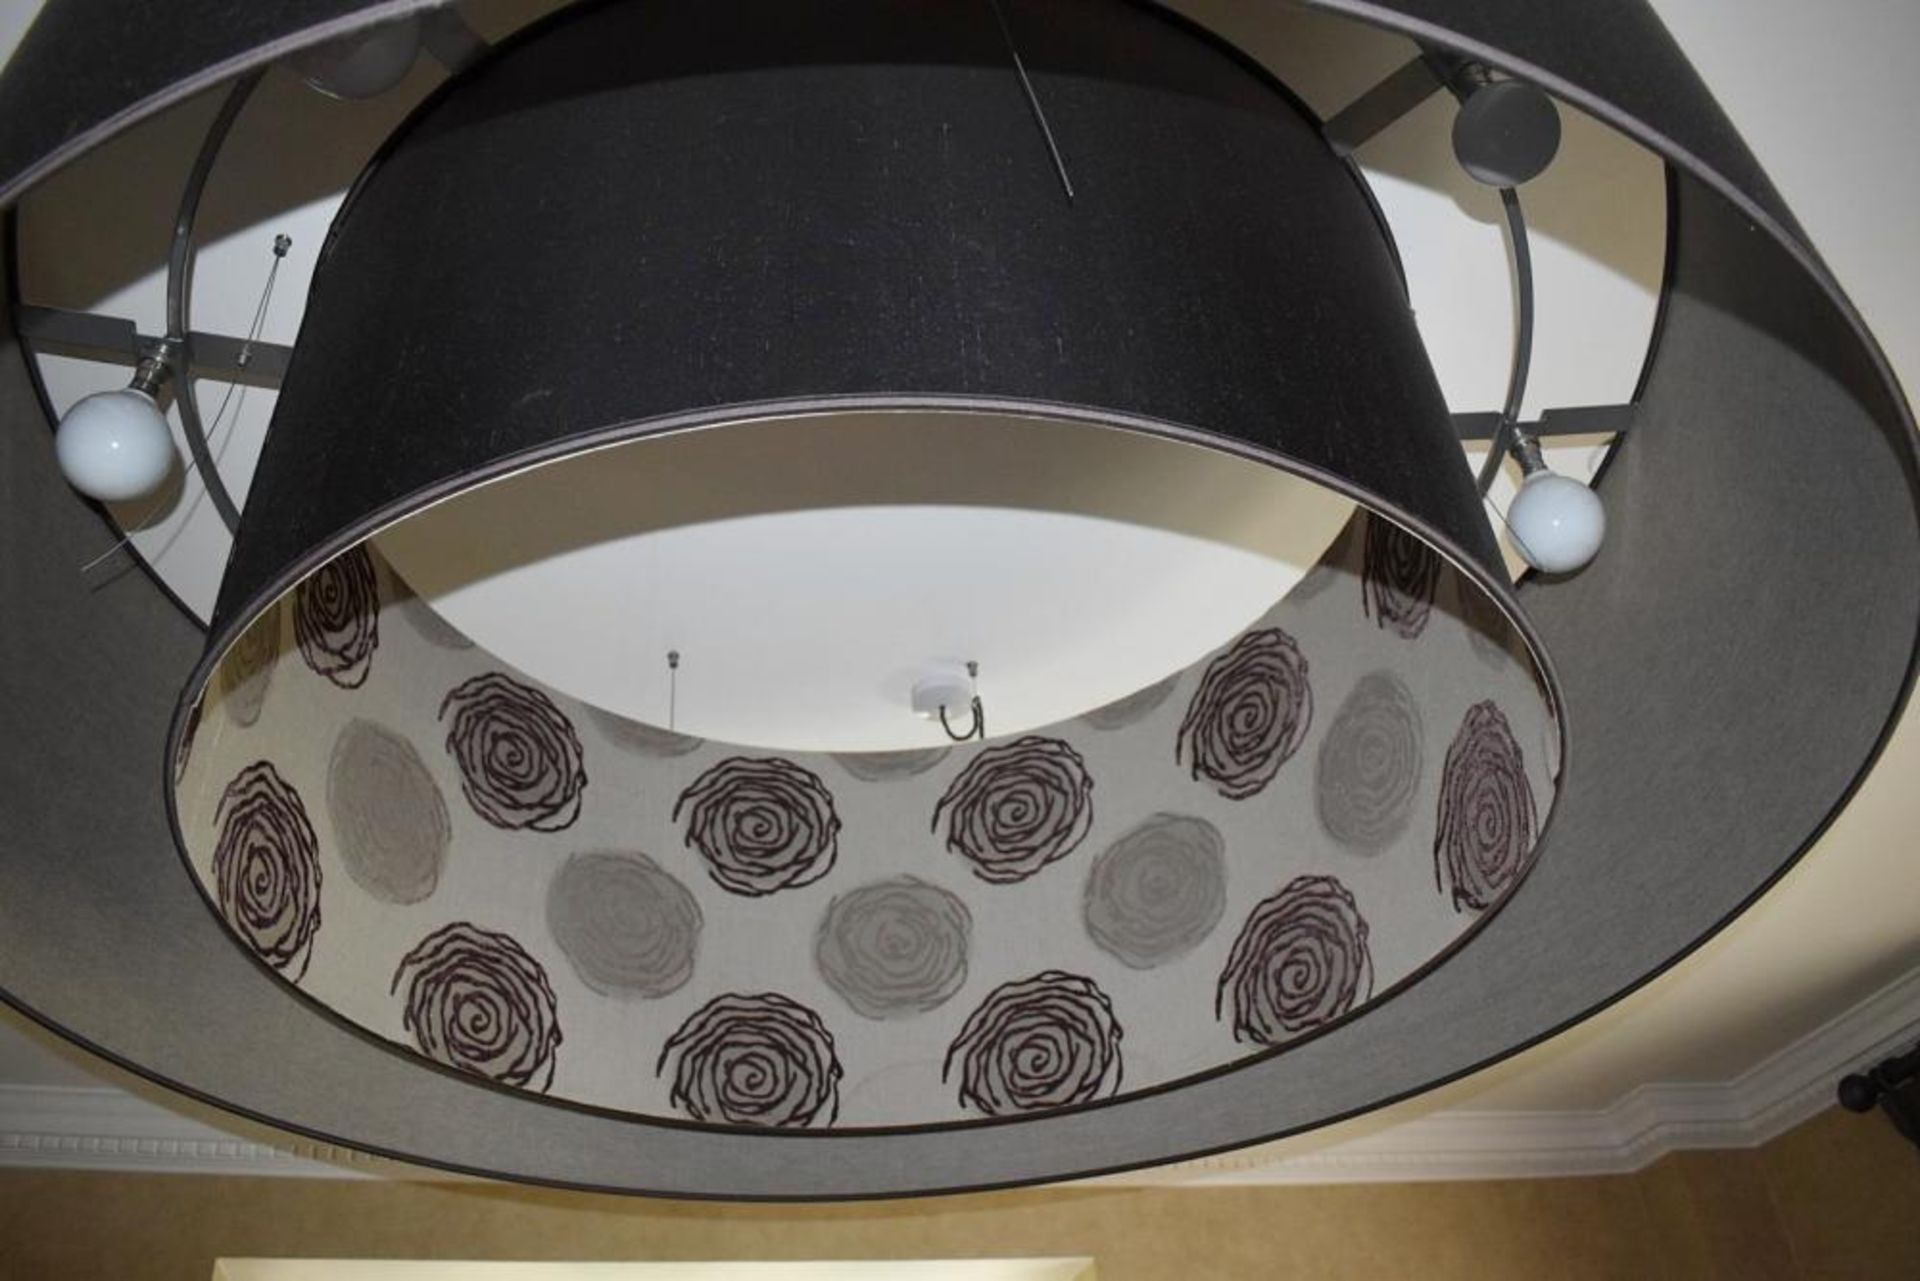 1 x Huge 1.5 Metre Light Fitting Featuring A Double Shade - Dimensions: 150cm Diamter, 50cm Height - Image 6 of 7